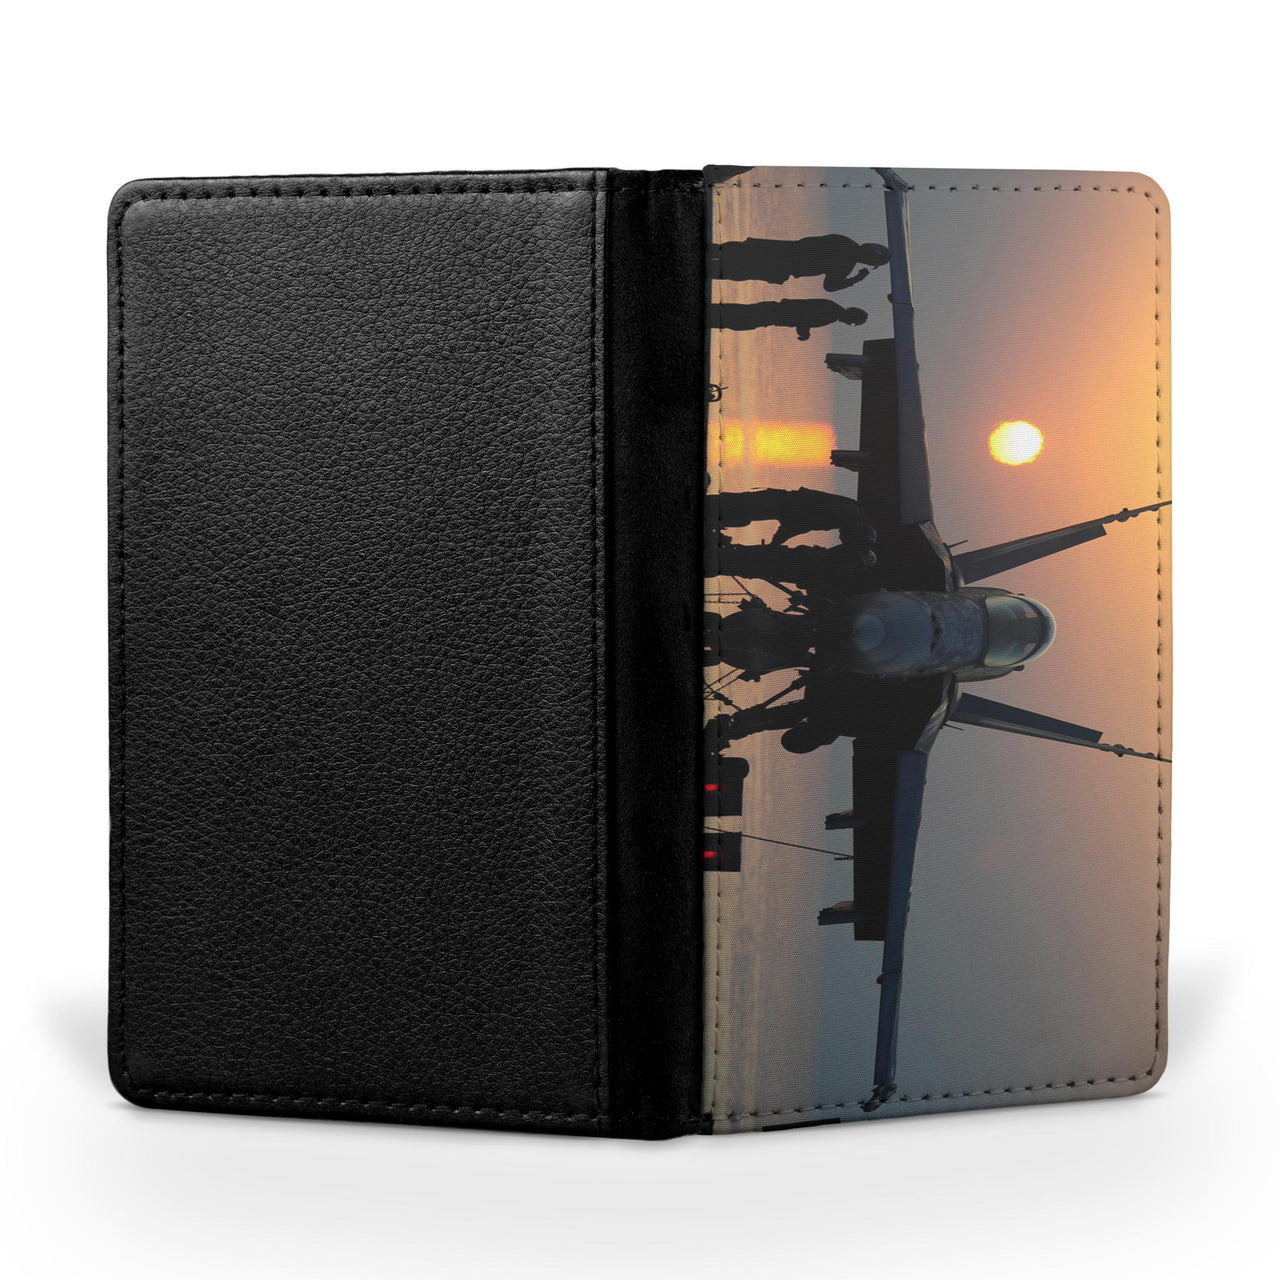 Military Jet During Sunset Printed Passport & Travel Cases